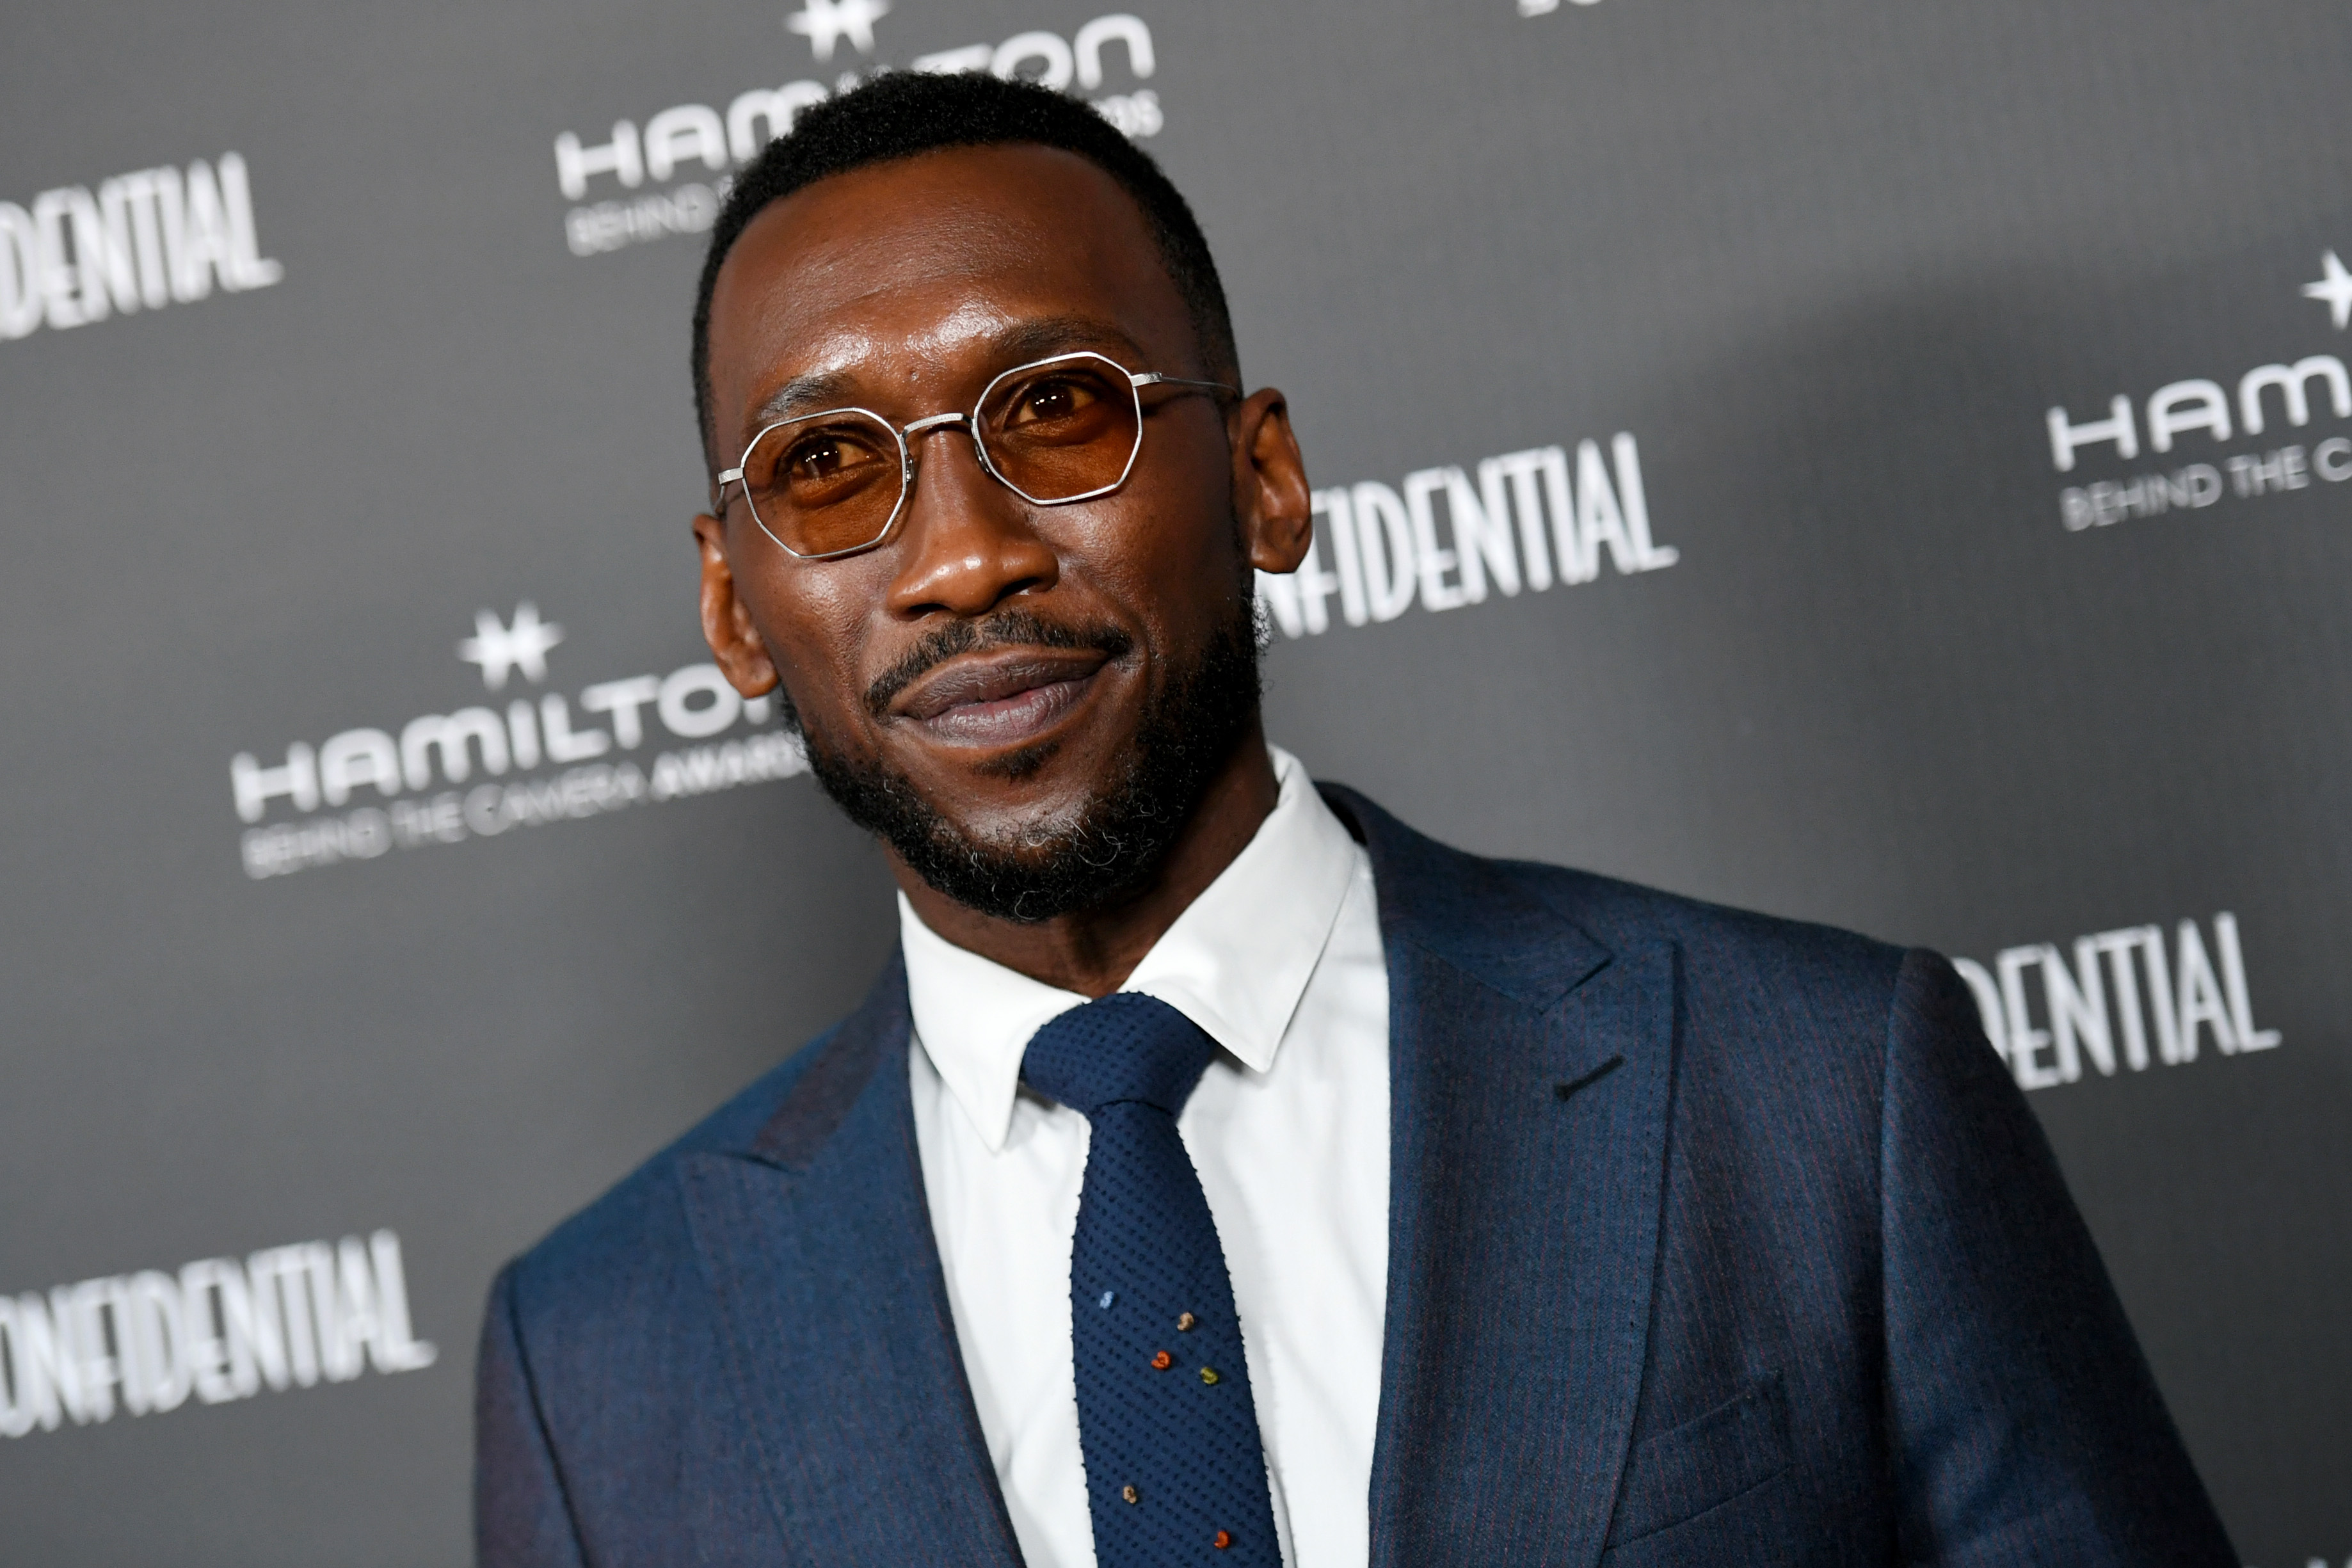 ‘Blade’ actor Mahershala Ali, heard in Marvel’s ‘Eternals’ post-credits scene, wears a dark blue suit jacket over a white button-up shirt and dark blue tie and wears glasses.
